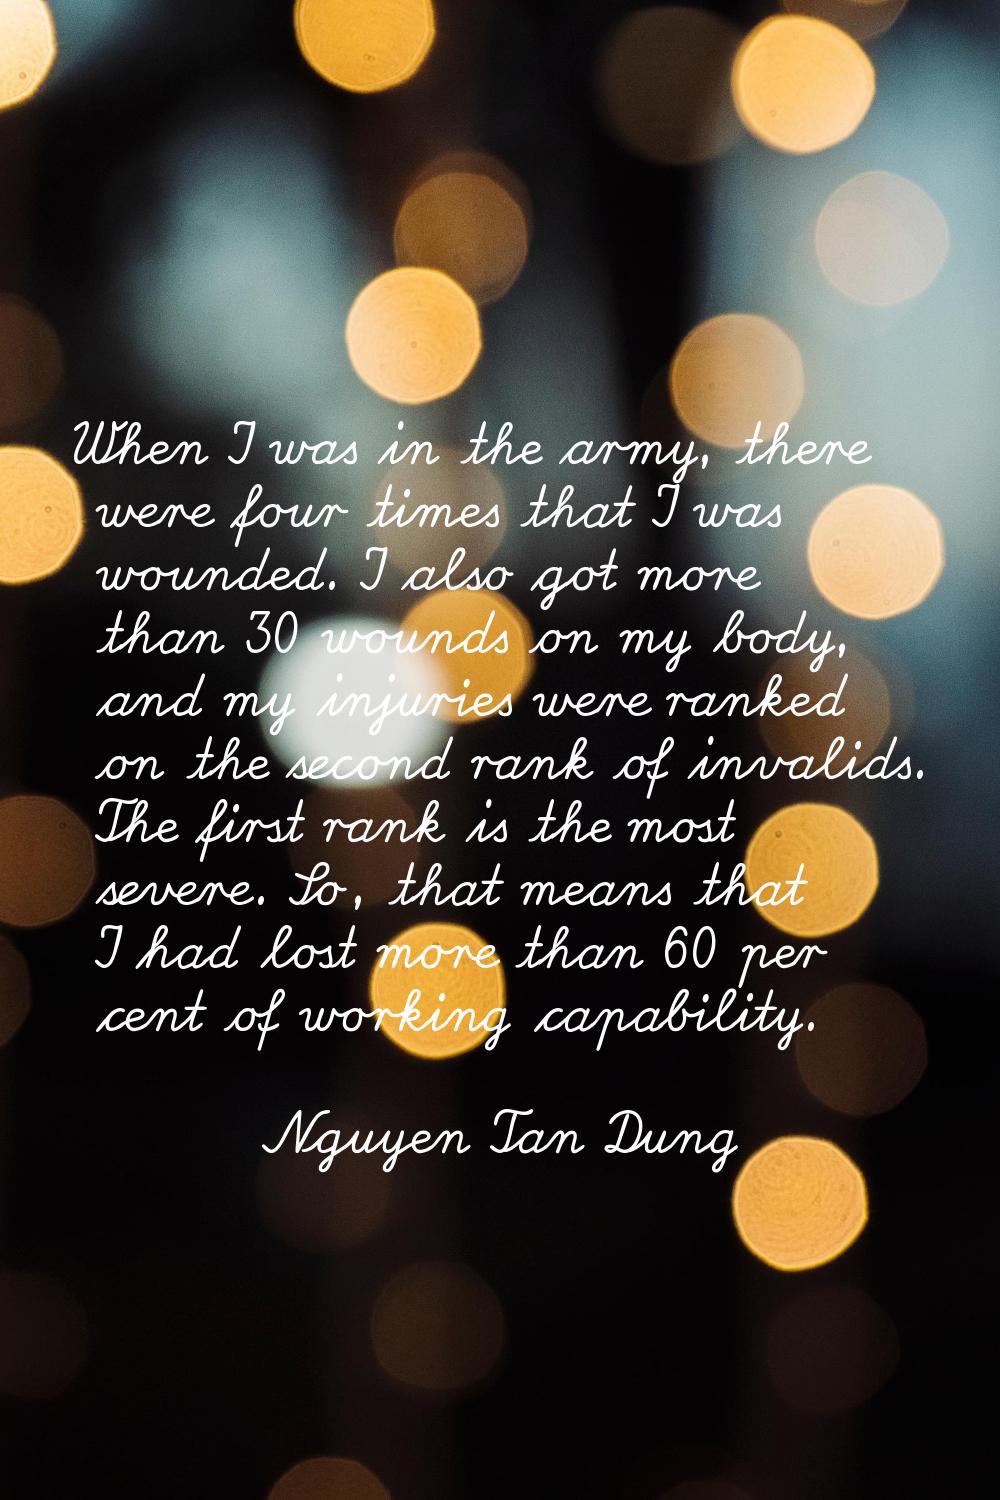 When I was in the army, there were four times that I was wounded. I also got more than 30 wounds on